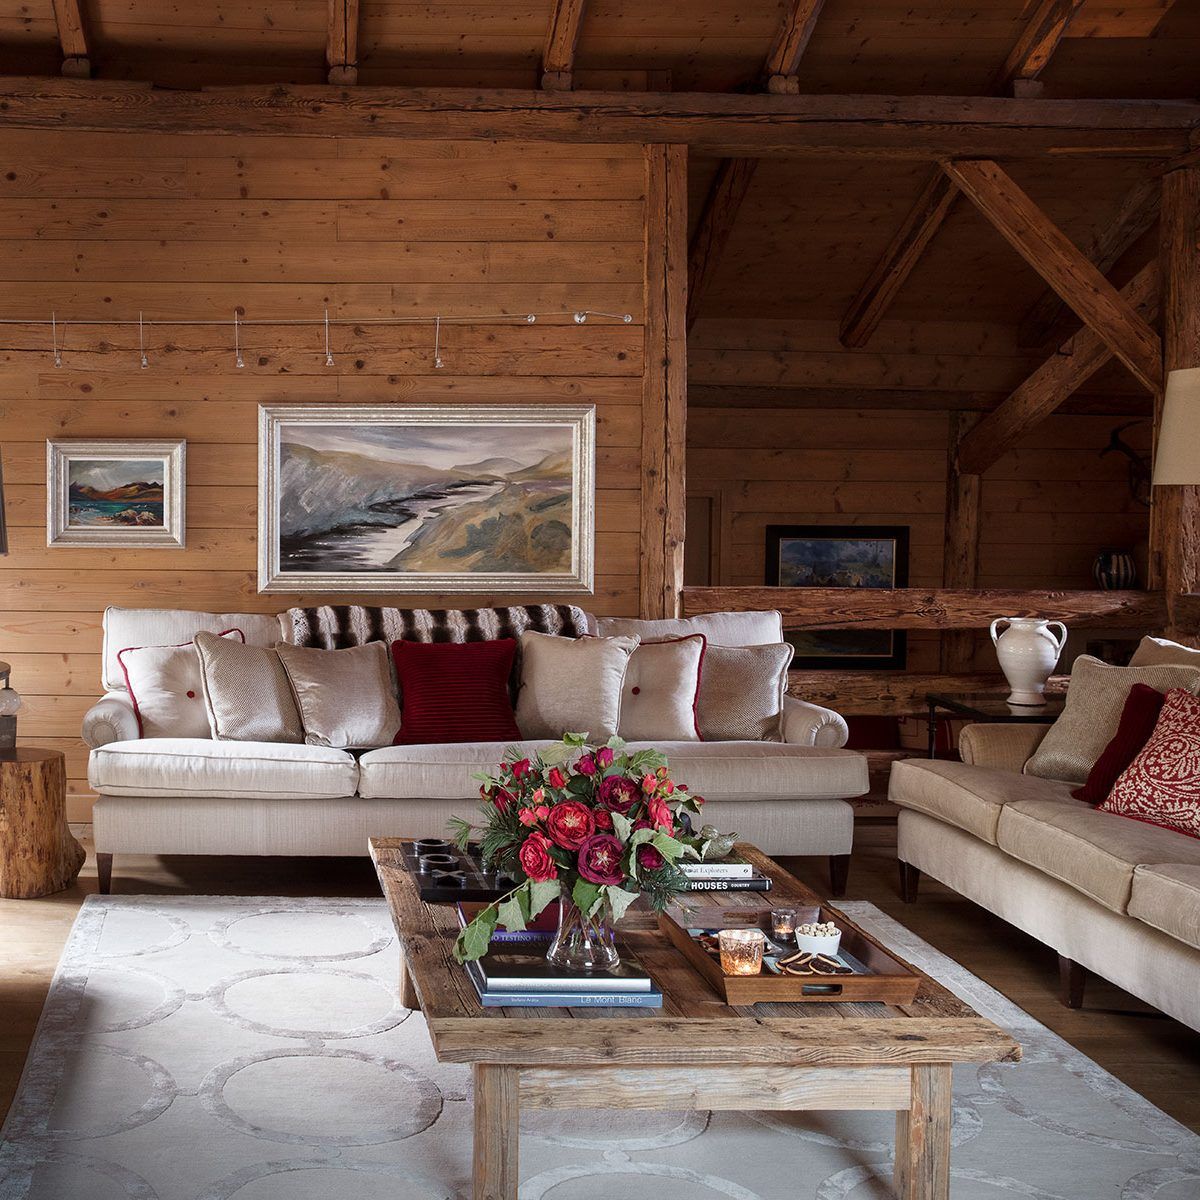 Design house: A traditional alpine home in Combloux, designed by Tor Vivian